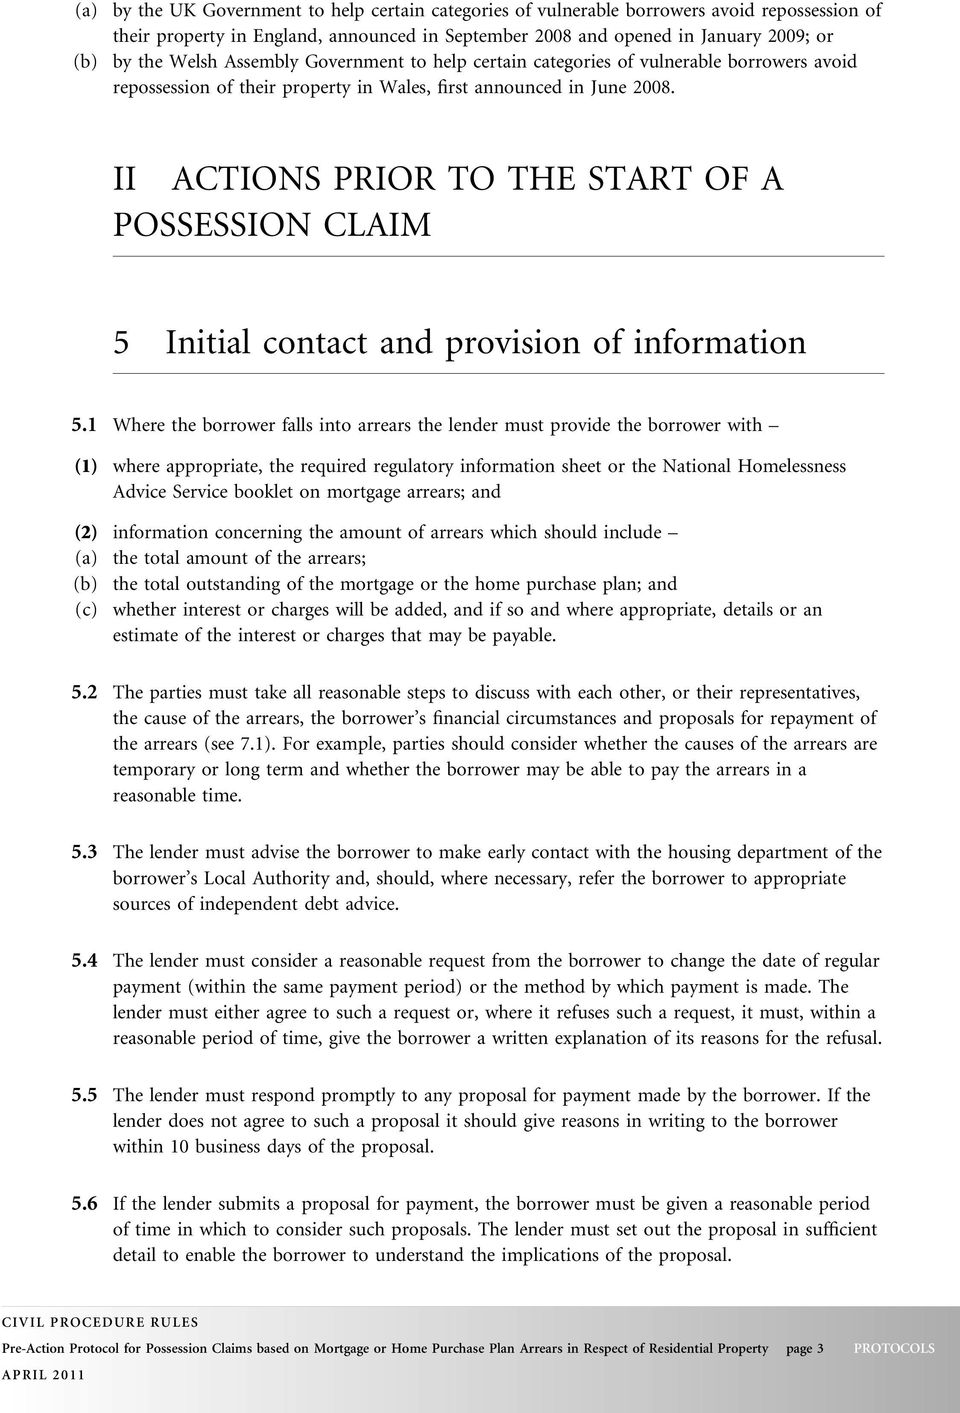 II ACTIONS PRIOR TO THE START OF A POSSESSION CLAIM 5 Initial contact and provision of information 5.